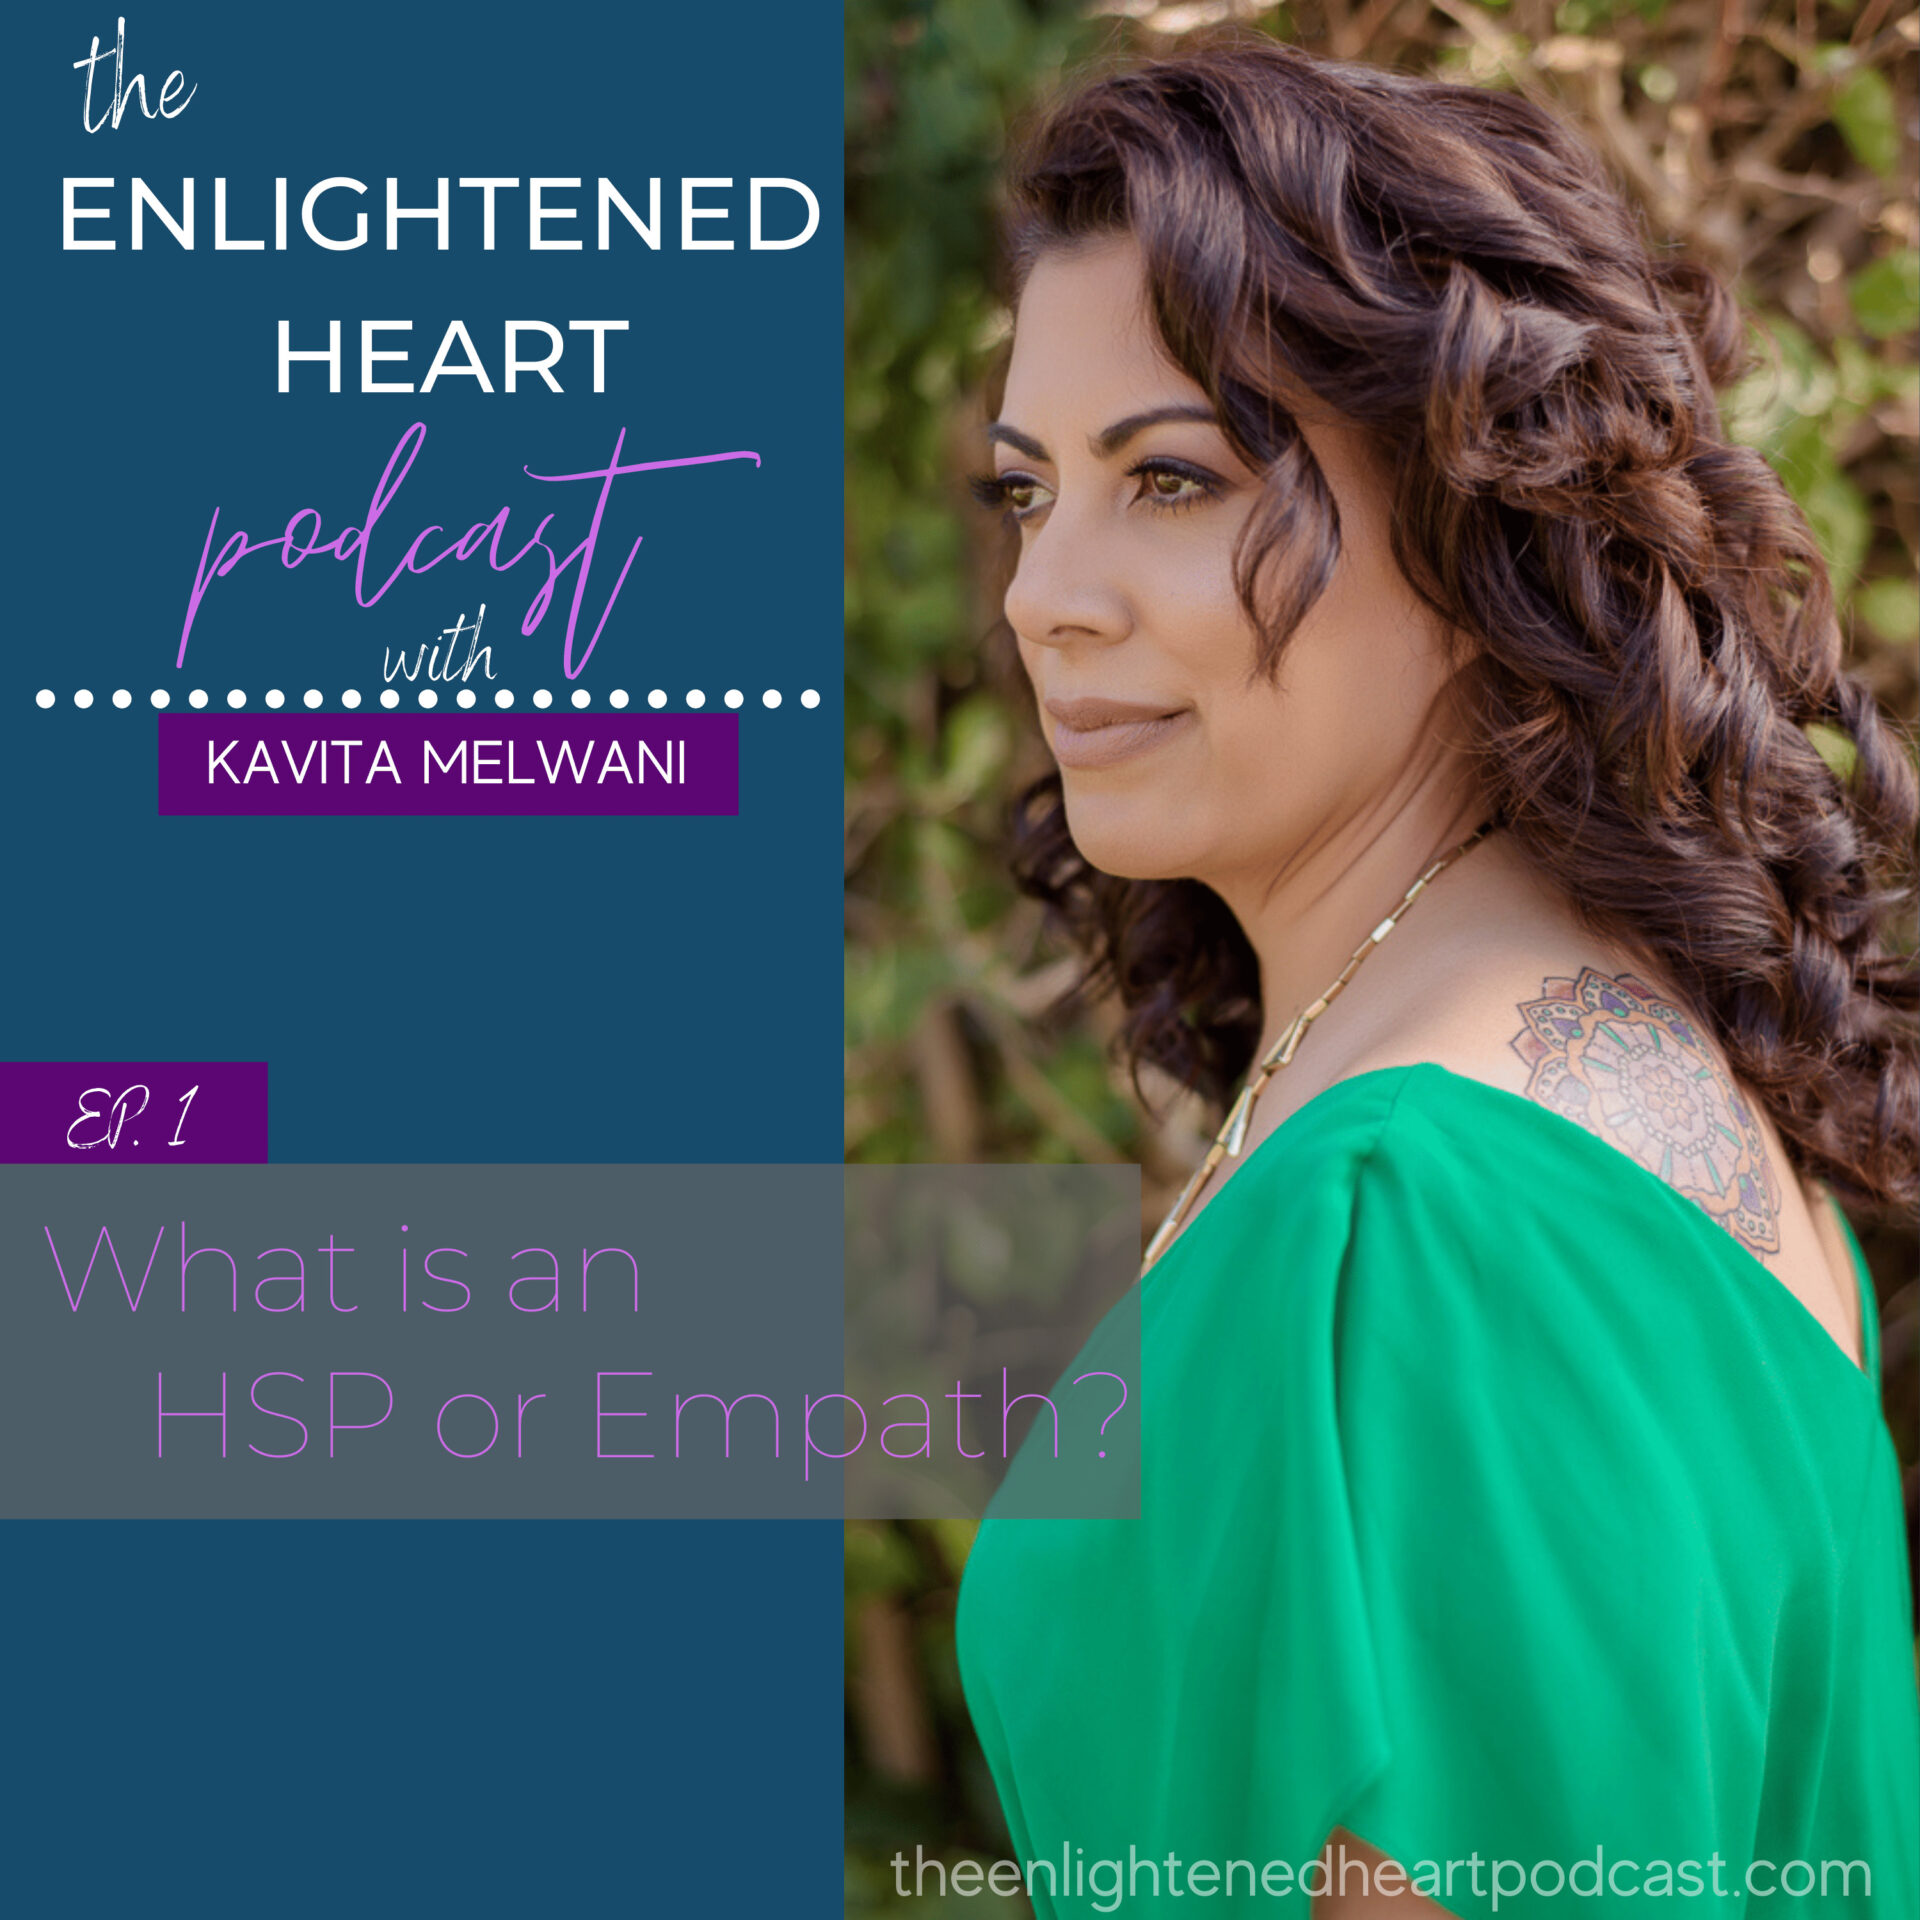 What is an HSP or Empath?